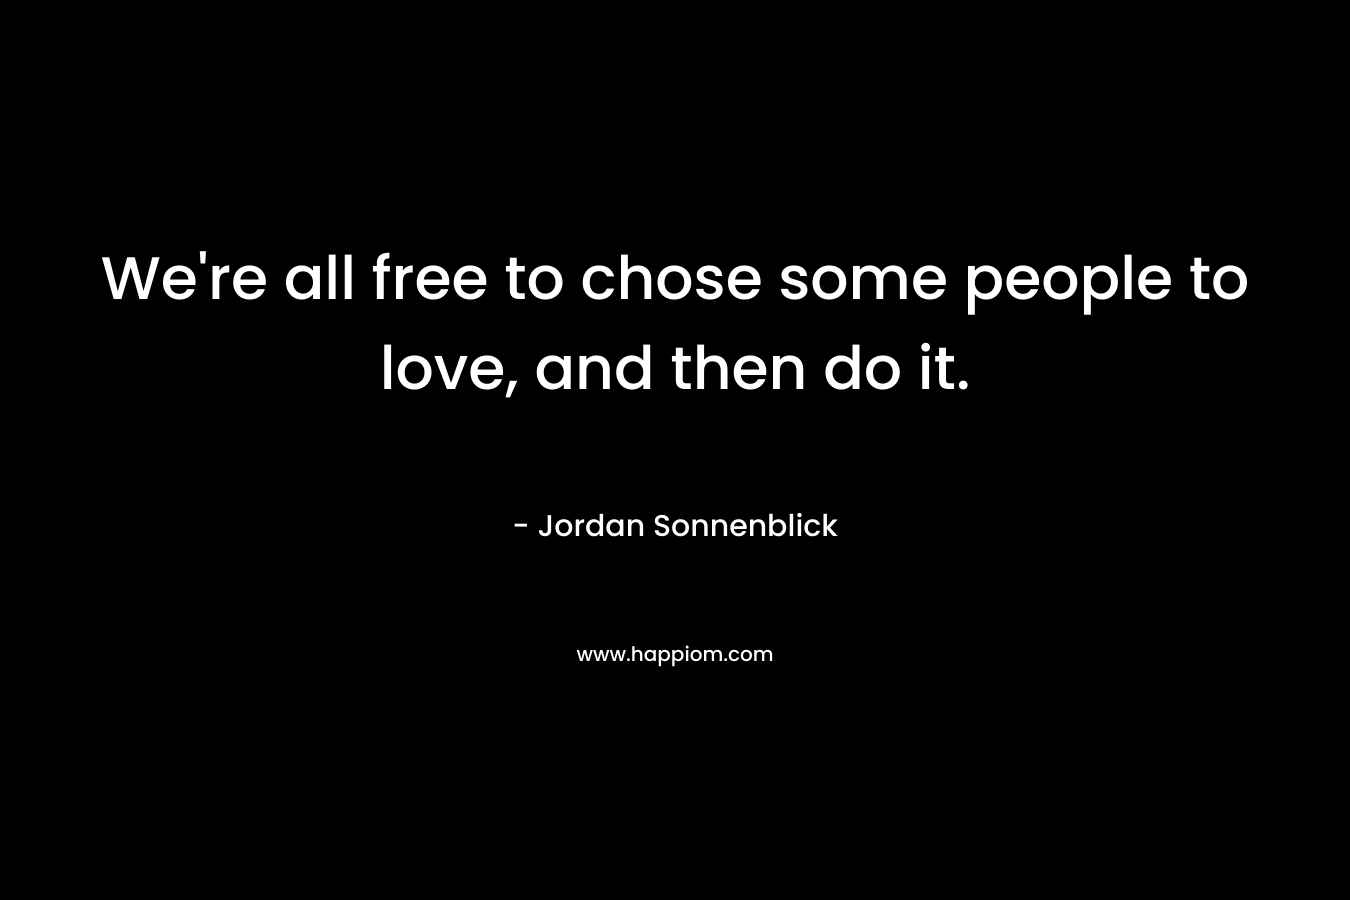 We’re all free to chose some people to love, and then do it. – Jordan Sonnenblick